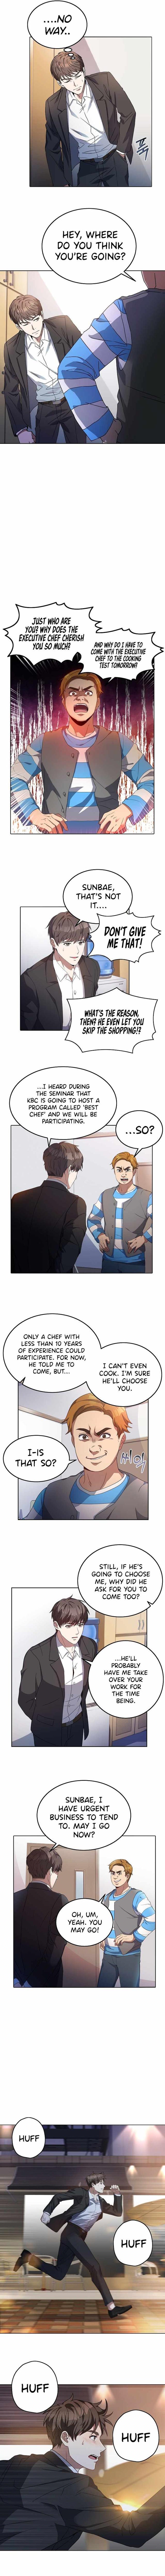 Youngest Chef from the 3rd Rate Hotel chapter 4